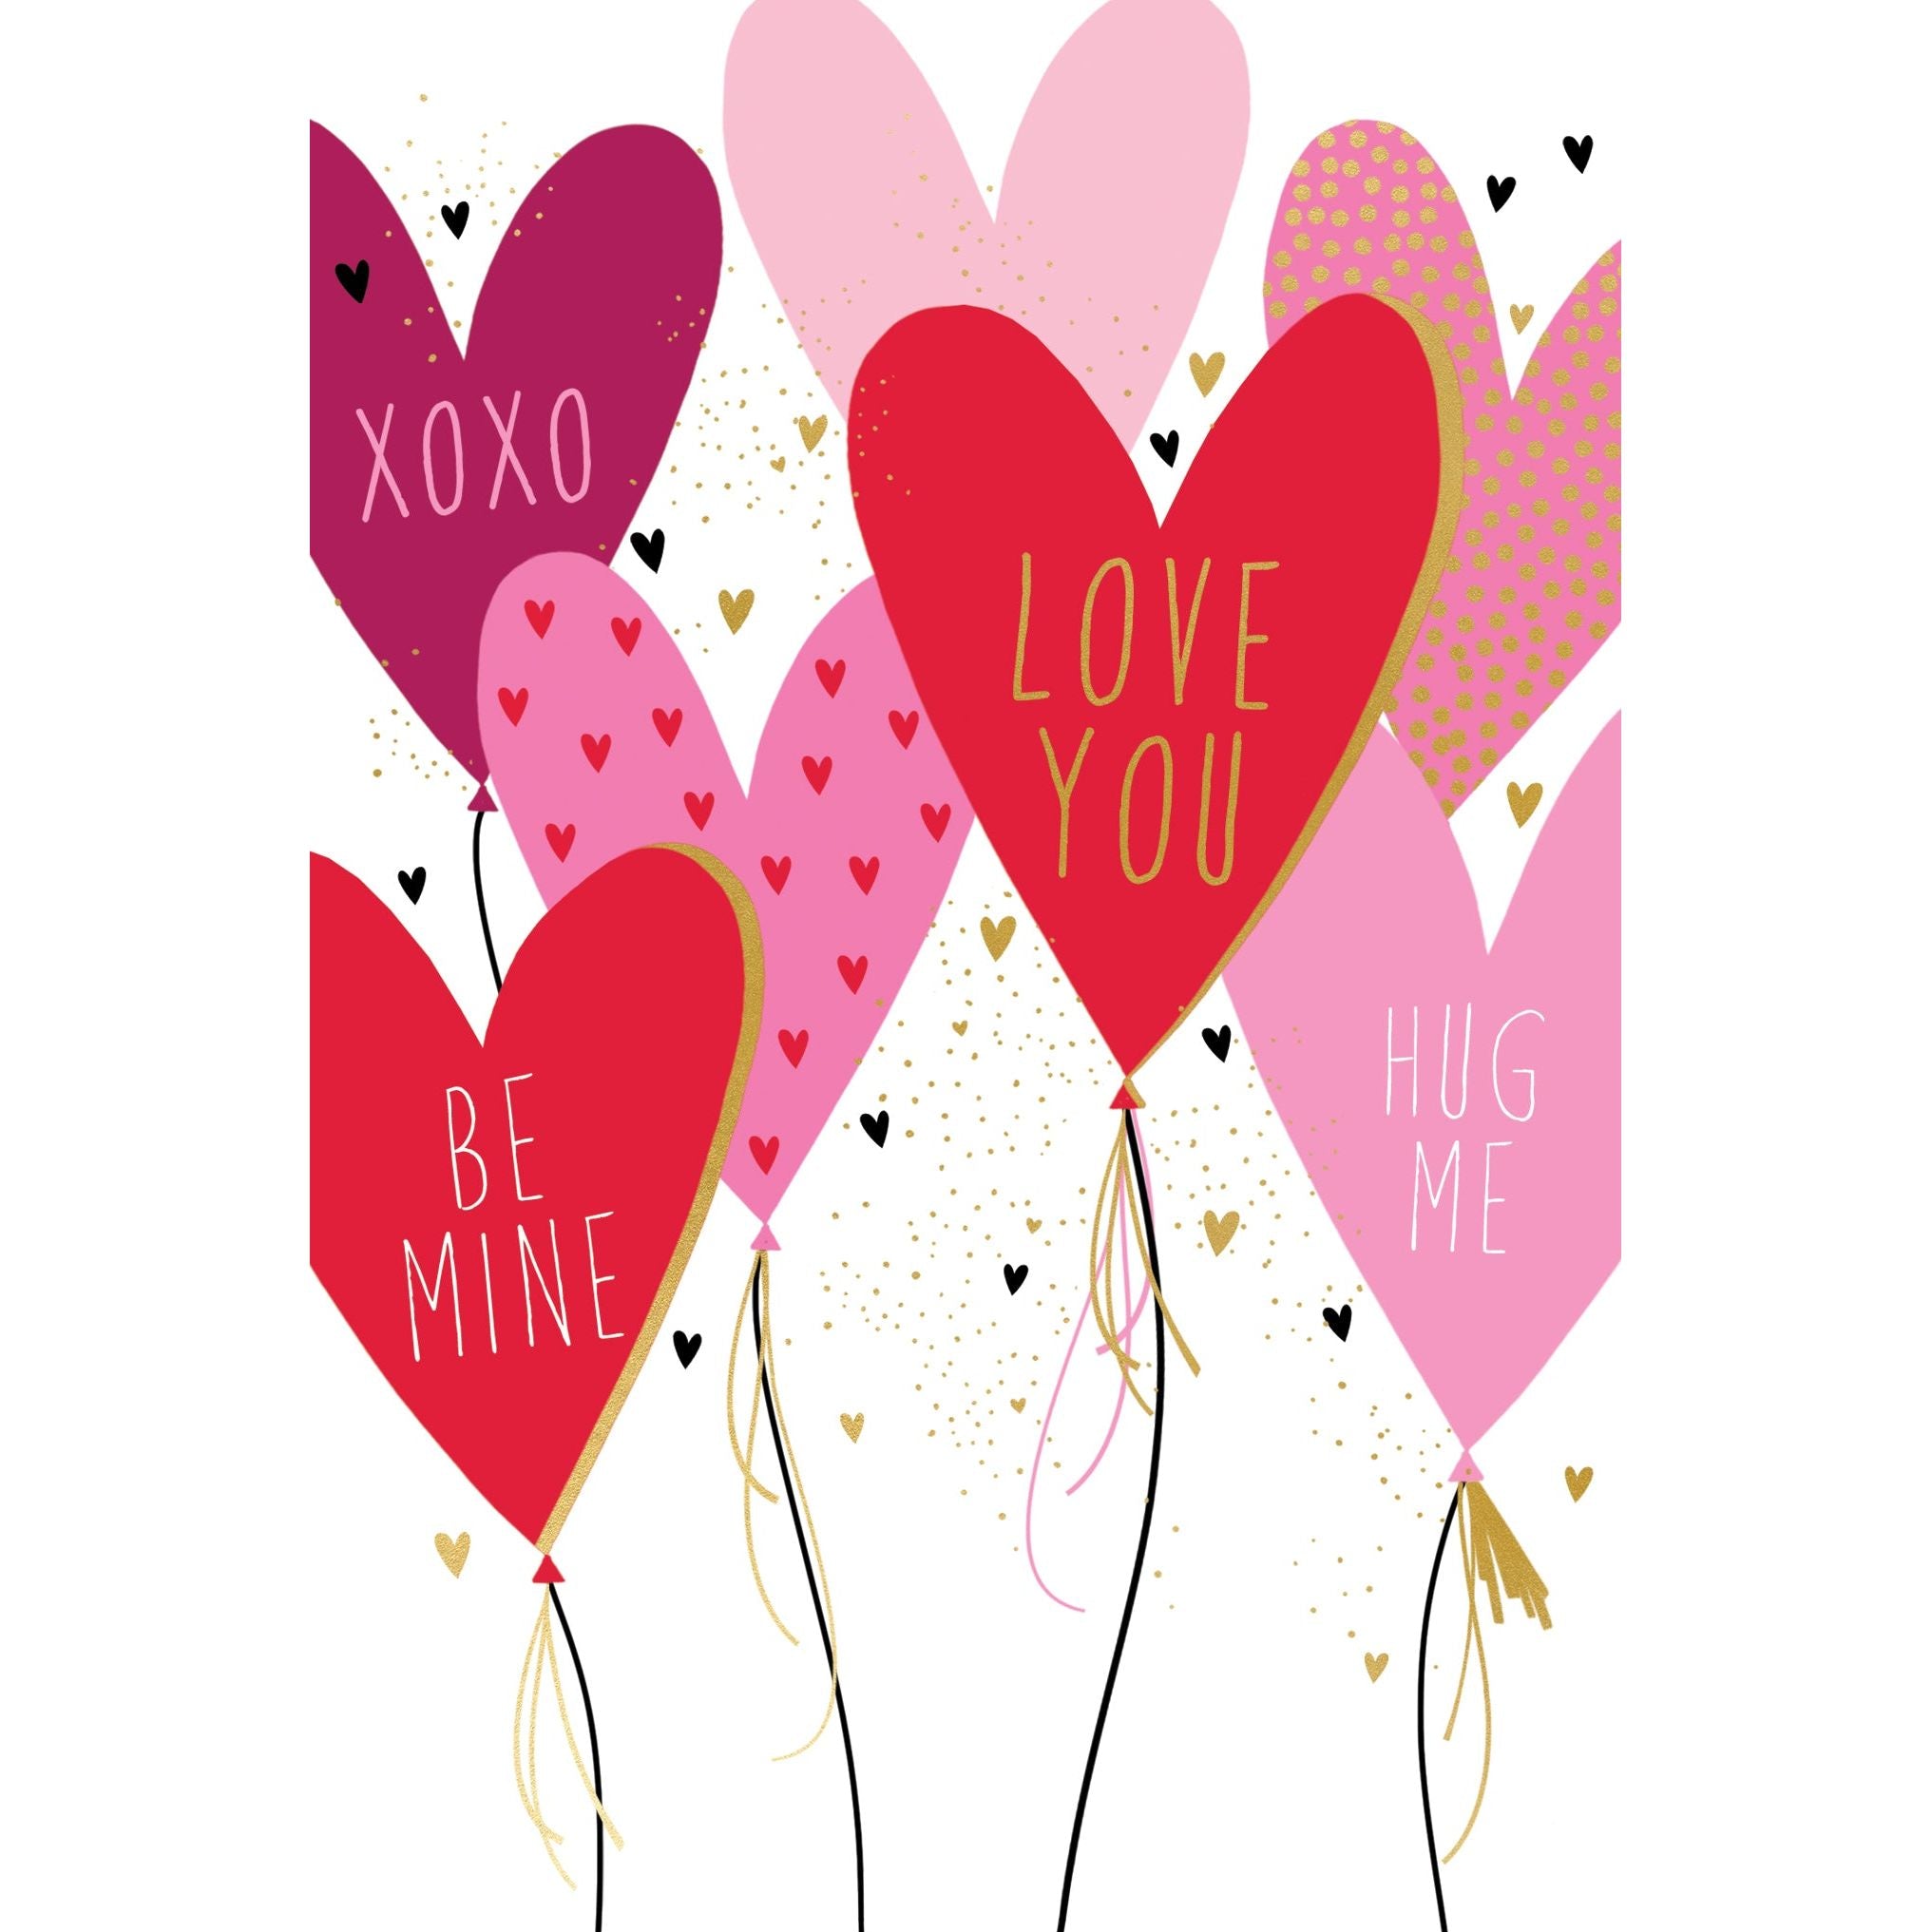 Heart Balloons Valentine's Day Card